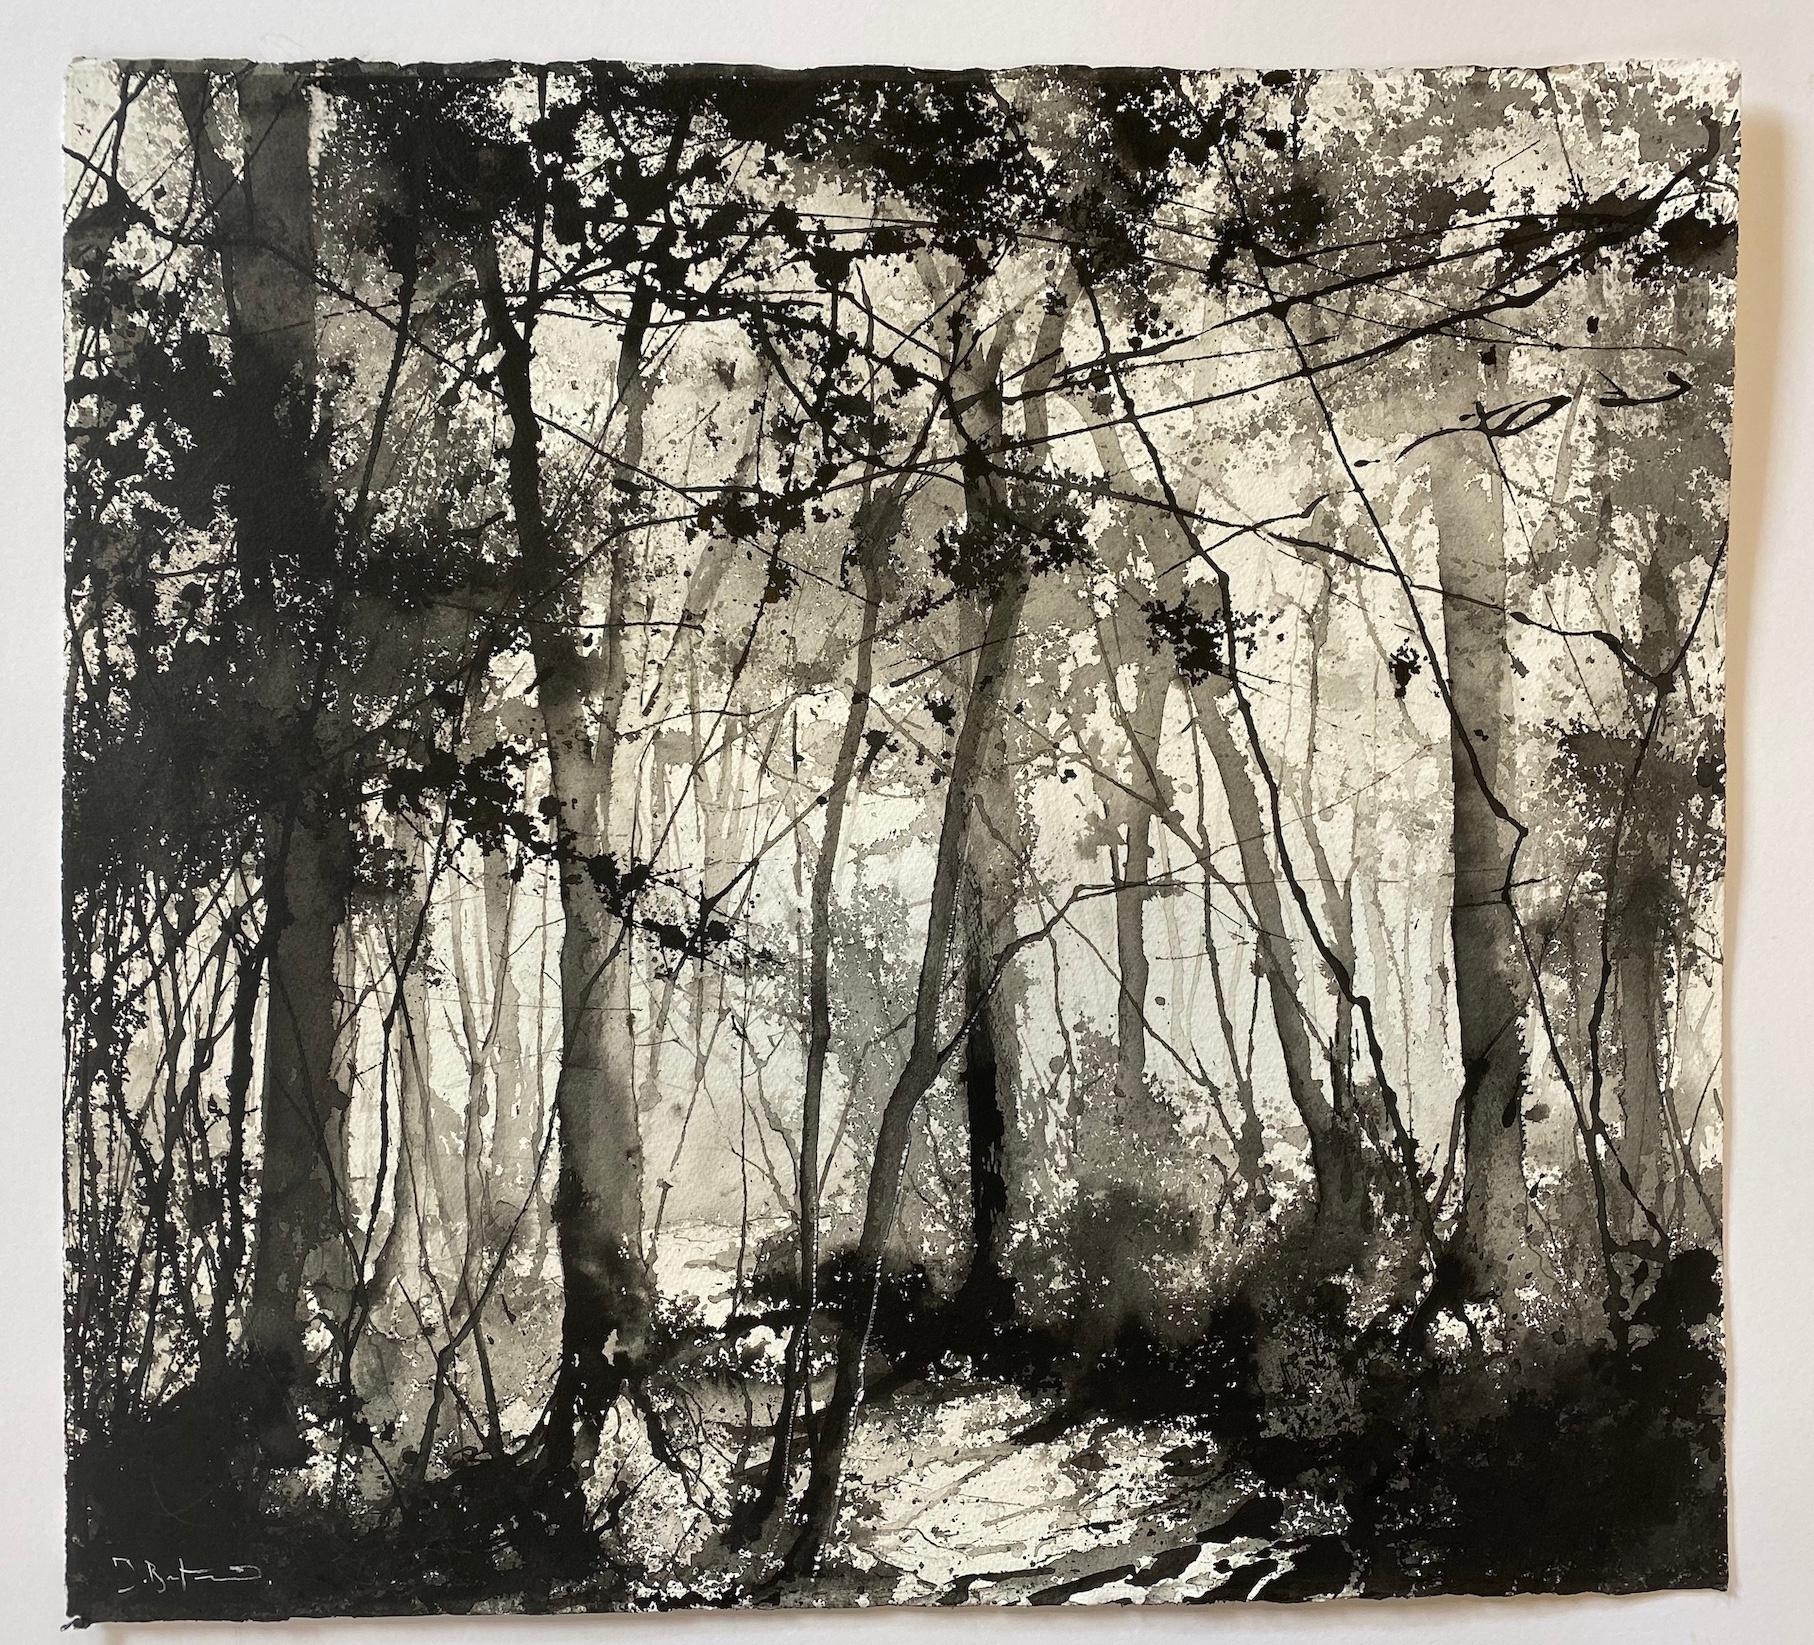 James Bonstow
Beechwood at Greenway
Original Landscape
Ink and Watercolour on Paper
Size: H 57cm x W 61.5cm x D 0.1cm
(Please note that in situ images are purely an indication of how a piece may look).

Beechwood at Greenway is an original ink and